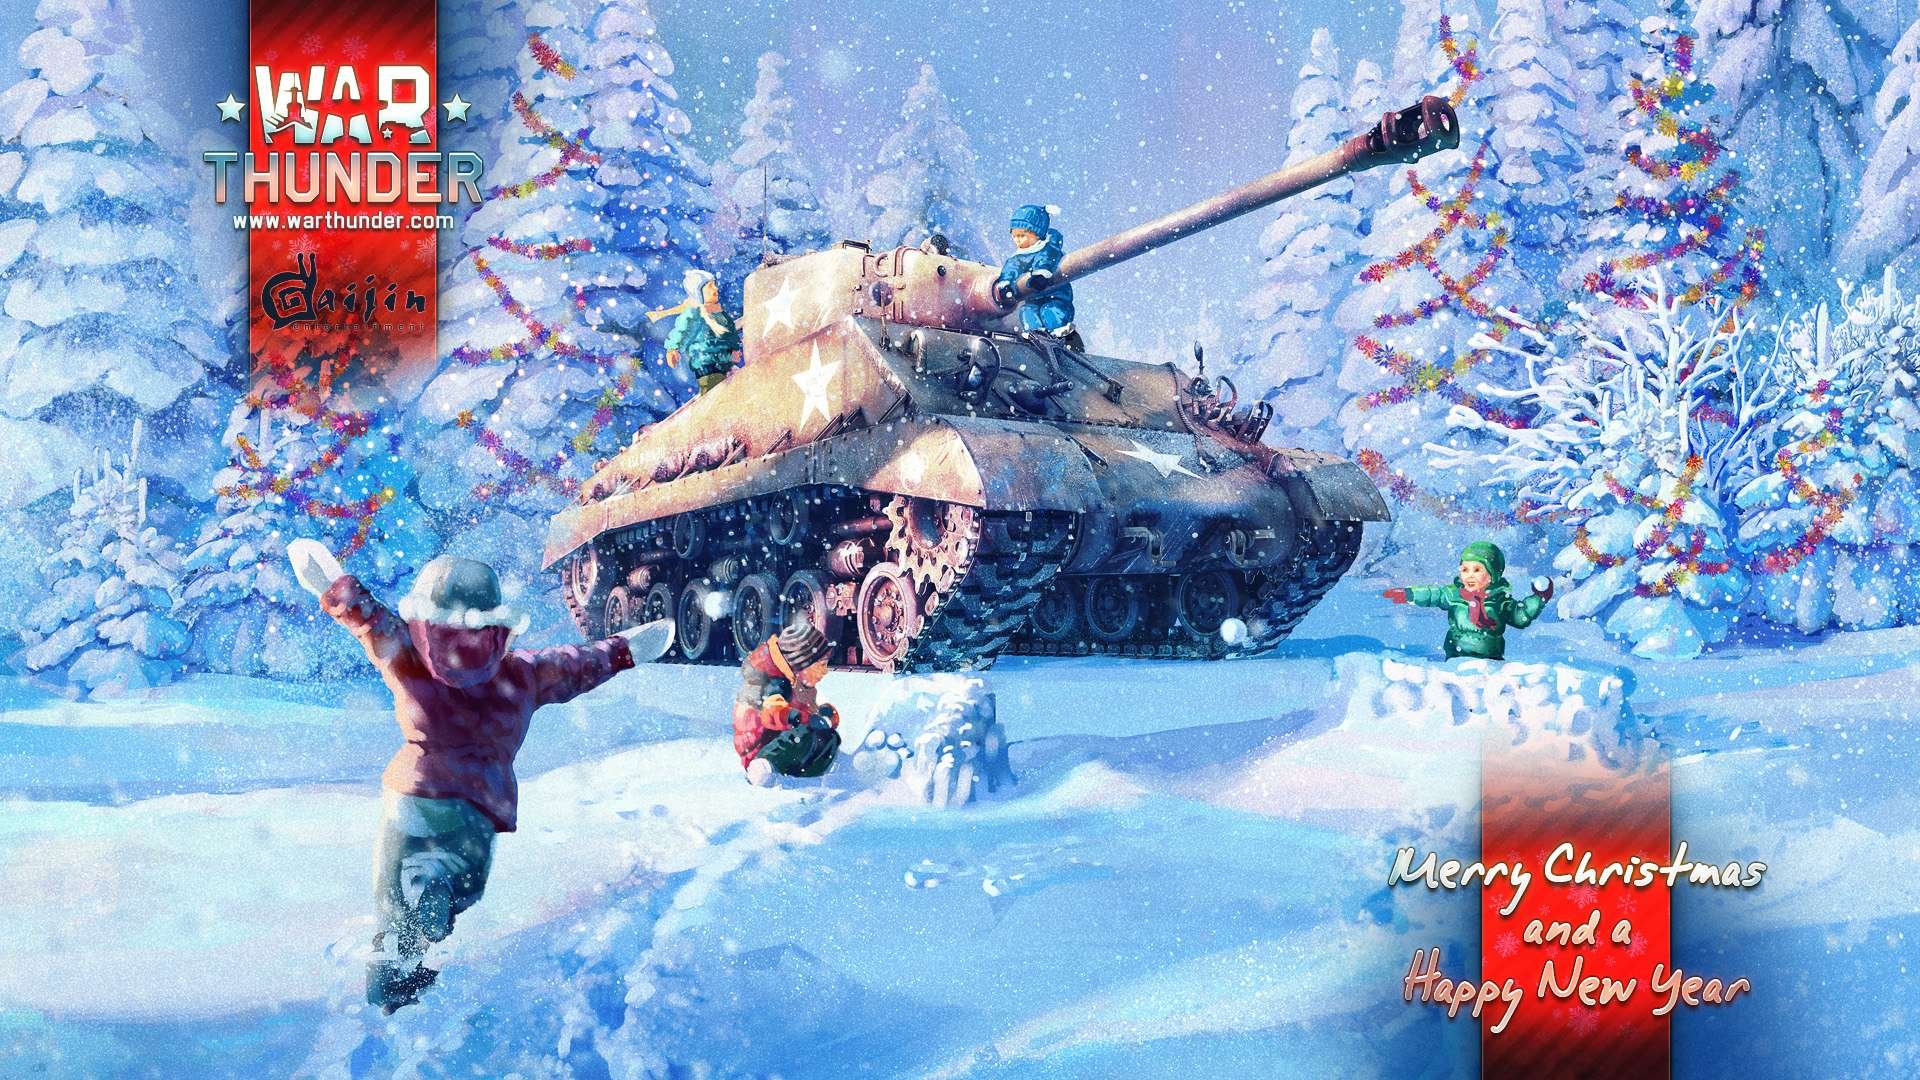 war, Thunder, Game, Video, Military, War, Battle, Wwll, Air, Force, Fighter, Jet, Warplane, Plane, Aircraft, Action, Fighting, Combat, Flight, Simulator, Mmo, Online, Shooter, Weapon, Tank, Strategy, Christmas Wallpaper